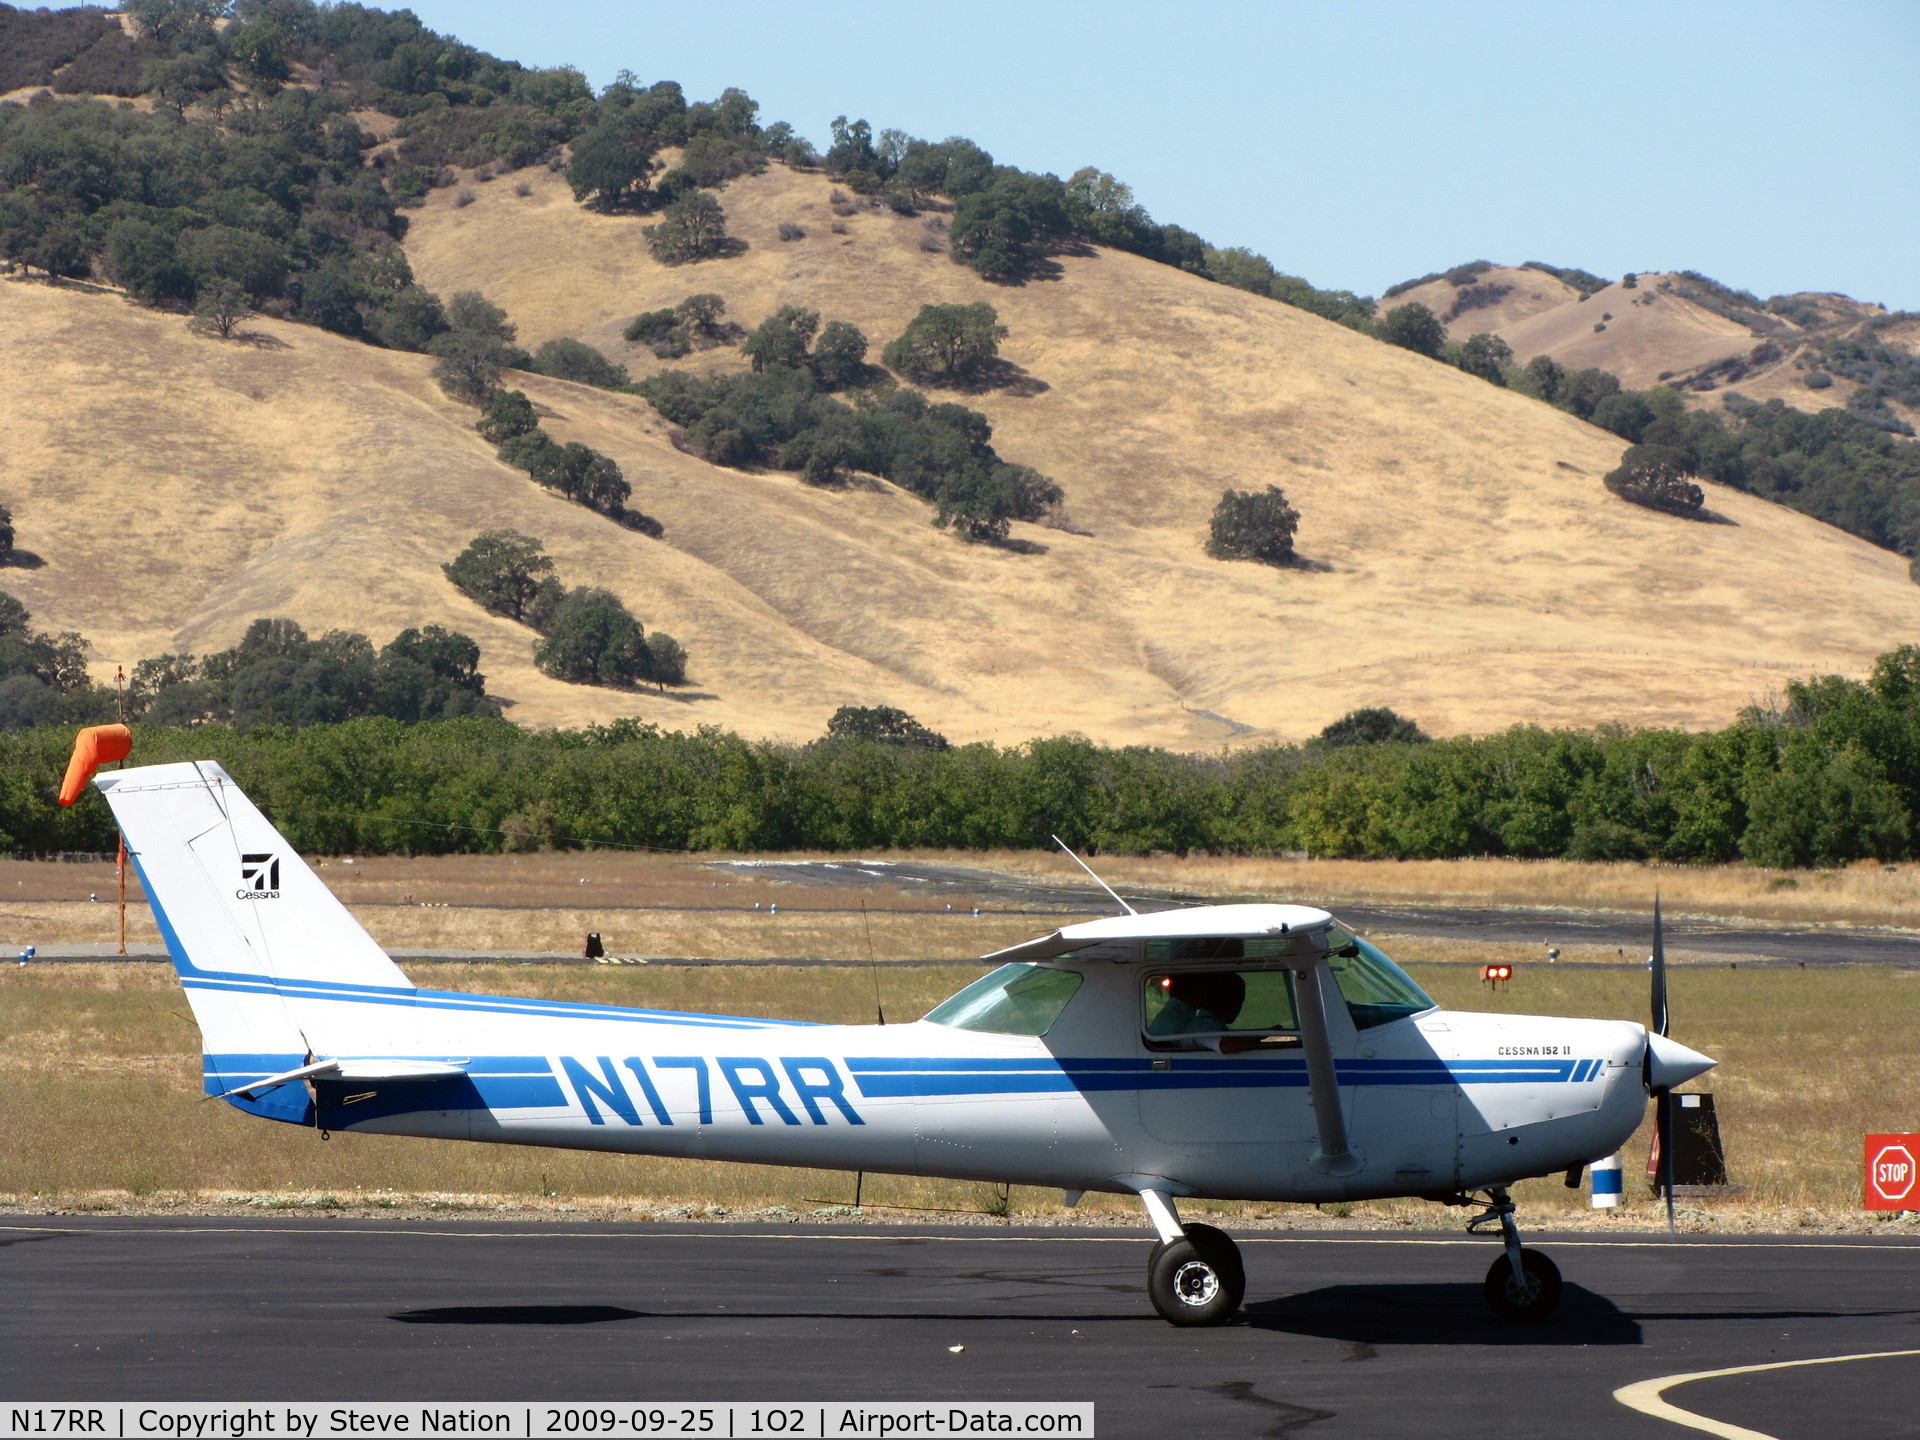 N17RR, 1979 Cessna 152 C/N 15284134, Christiansen Aviation 1979 Cessna 152 taxiing out to RW10 at Lampson Field